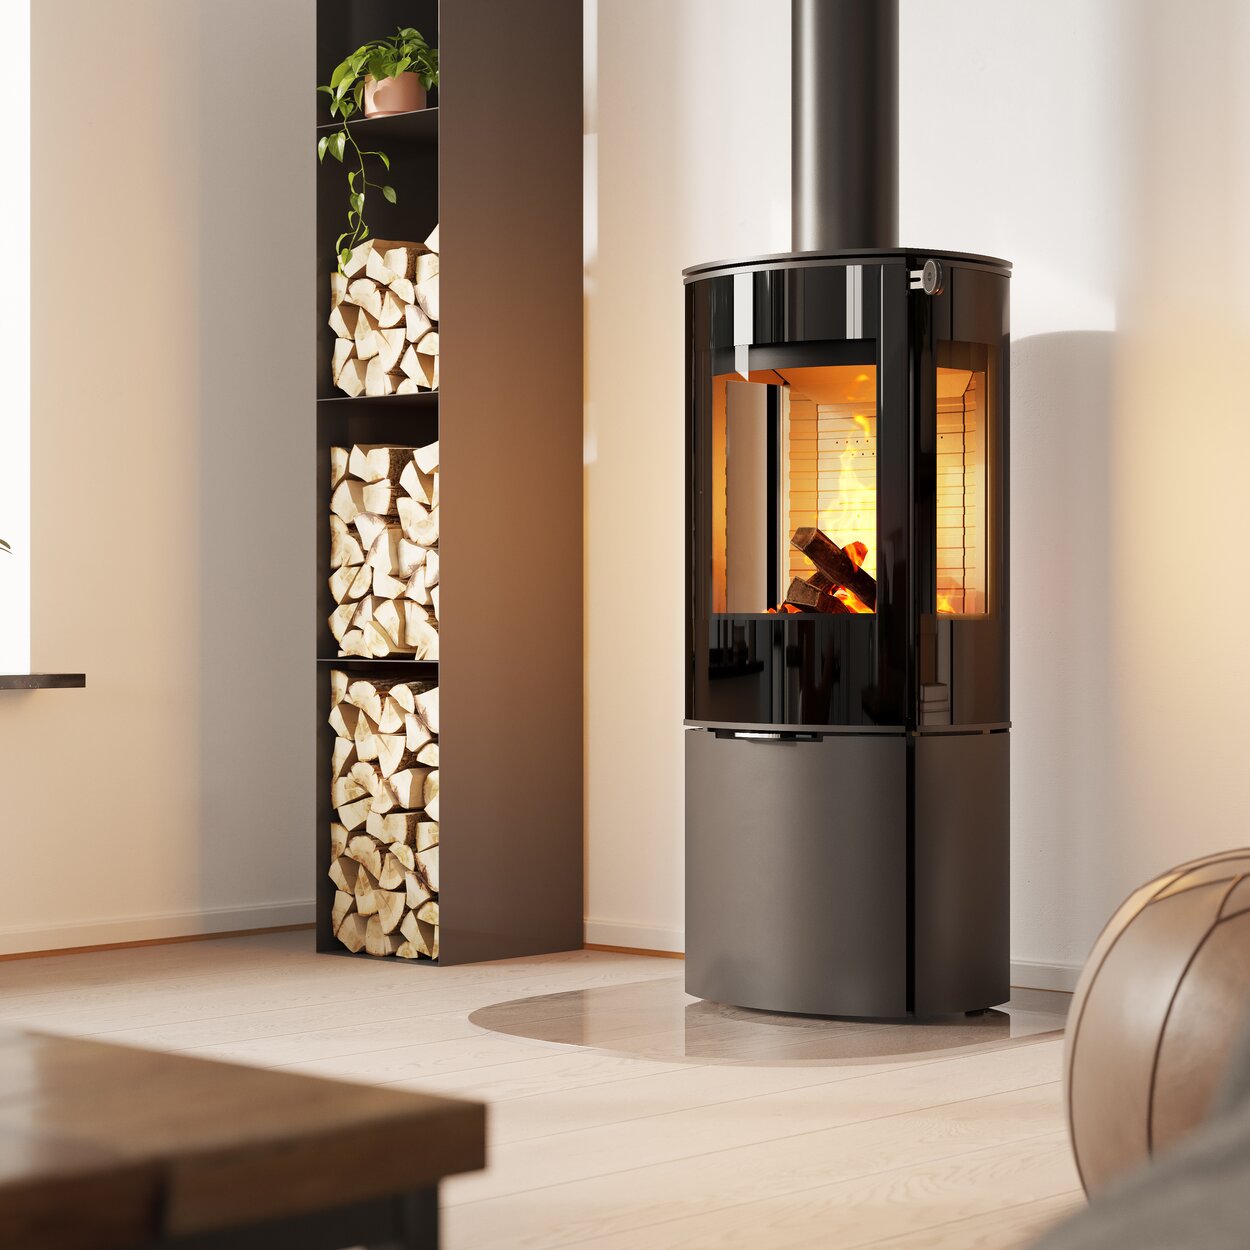 Wood stove CARO 110 in black with glass door and side window